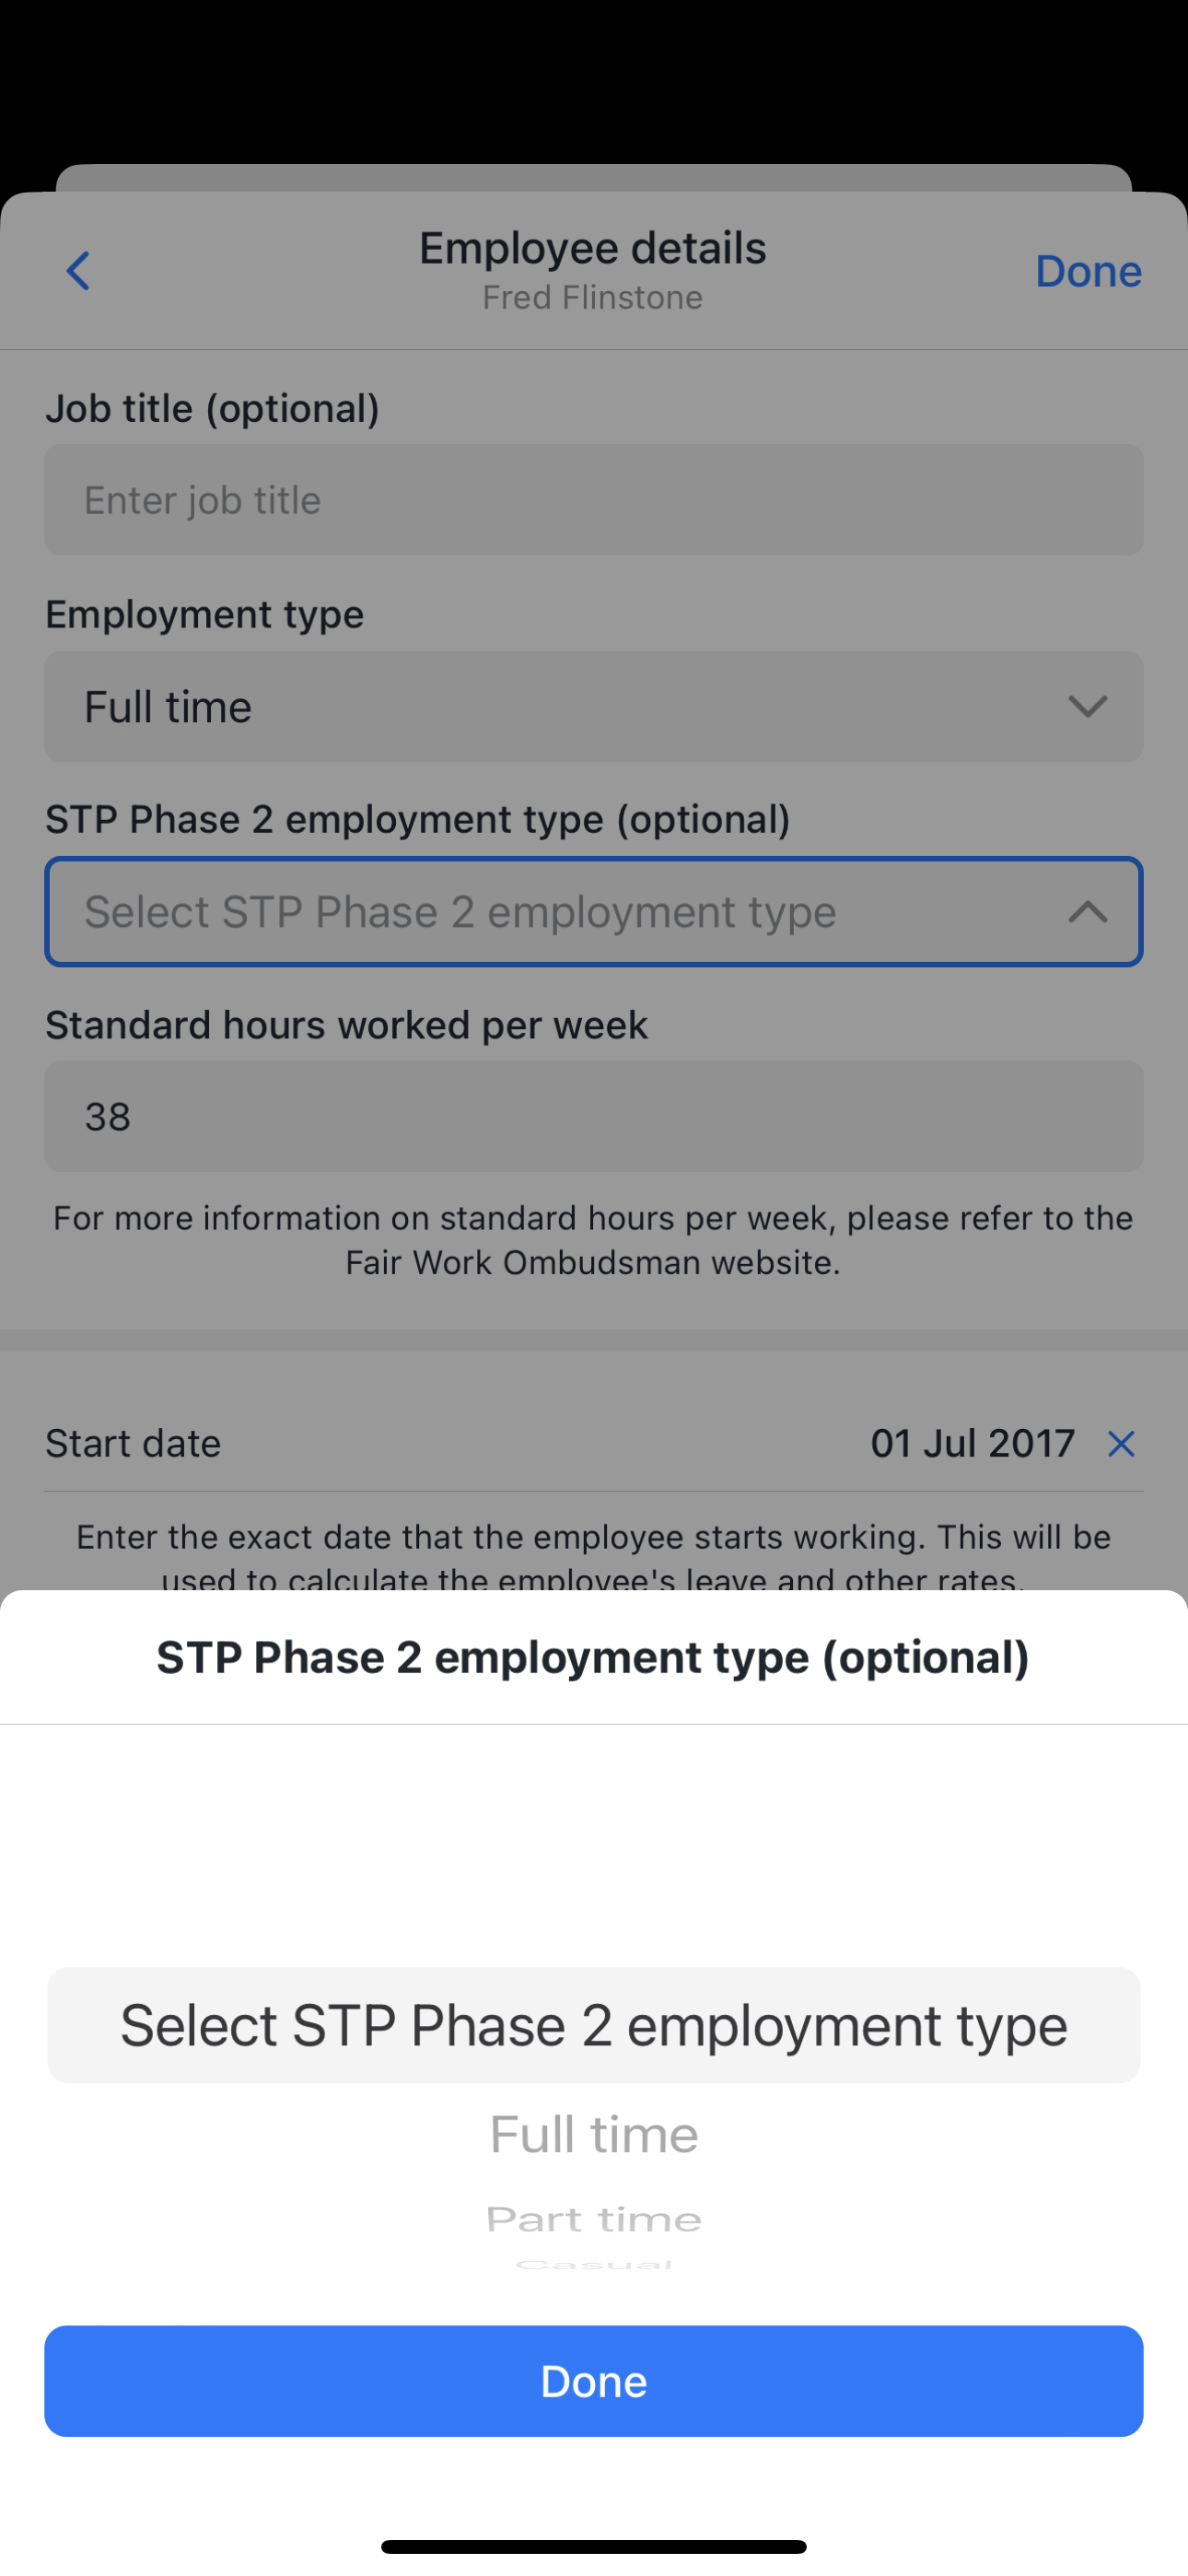 STP Phase 2 employment type (optional)